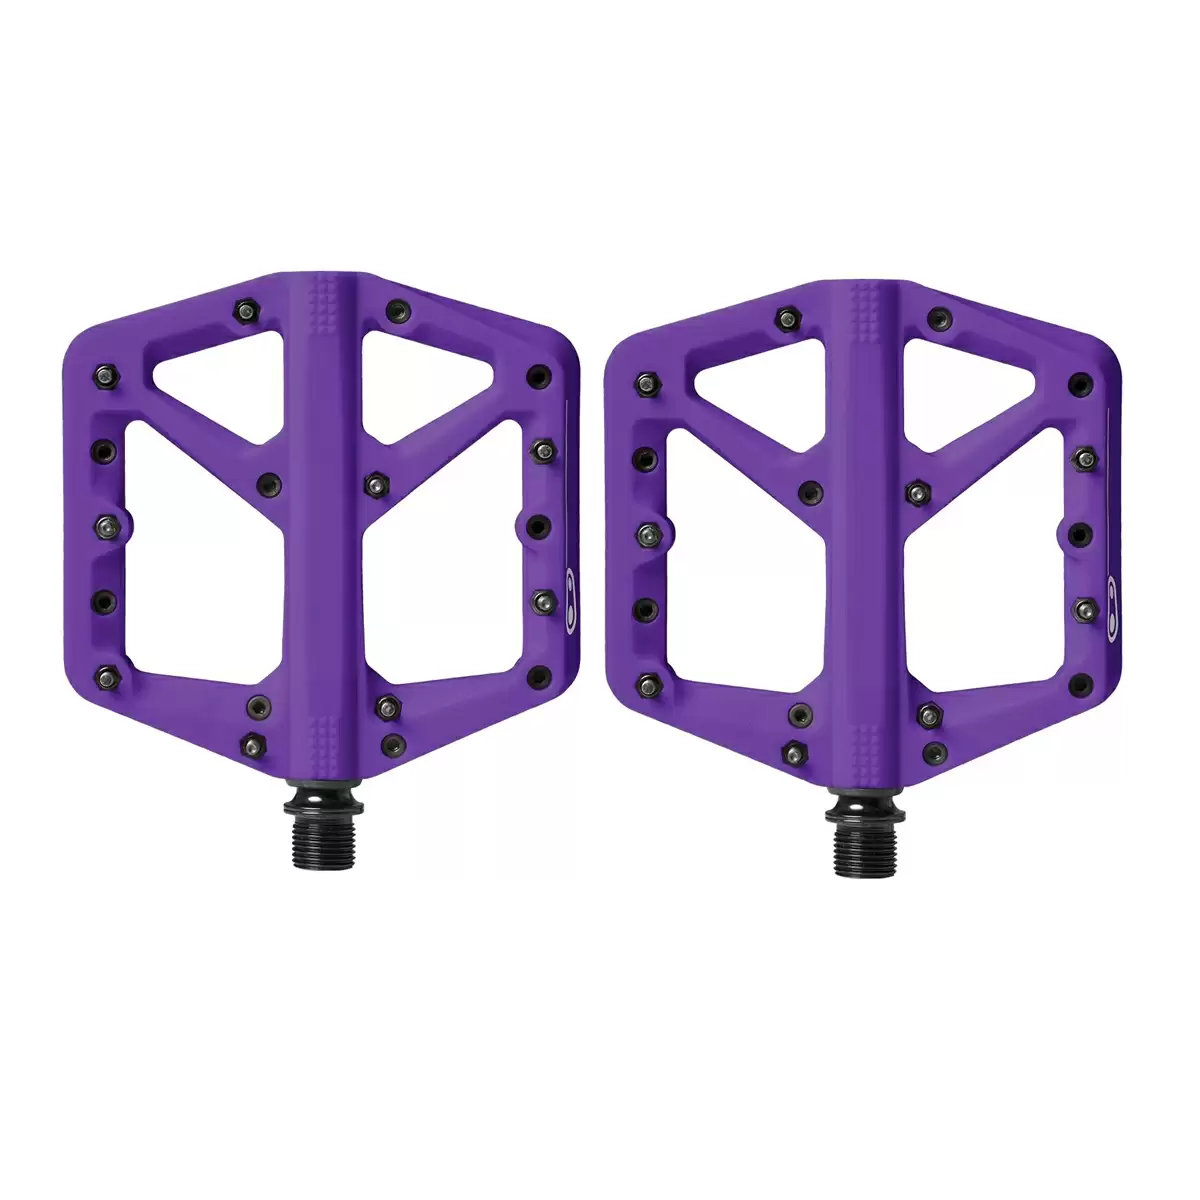 Pair of pedals Stamp 1 Large purple - image